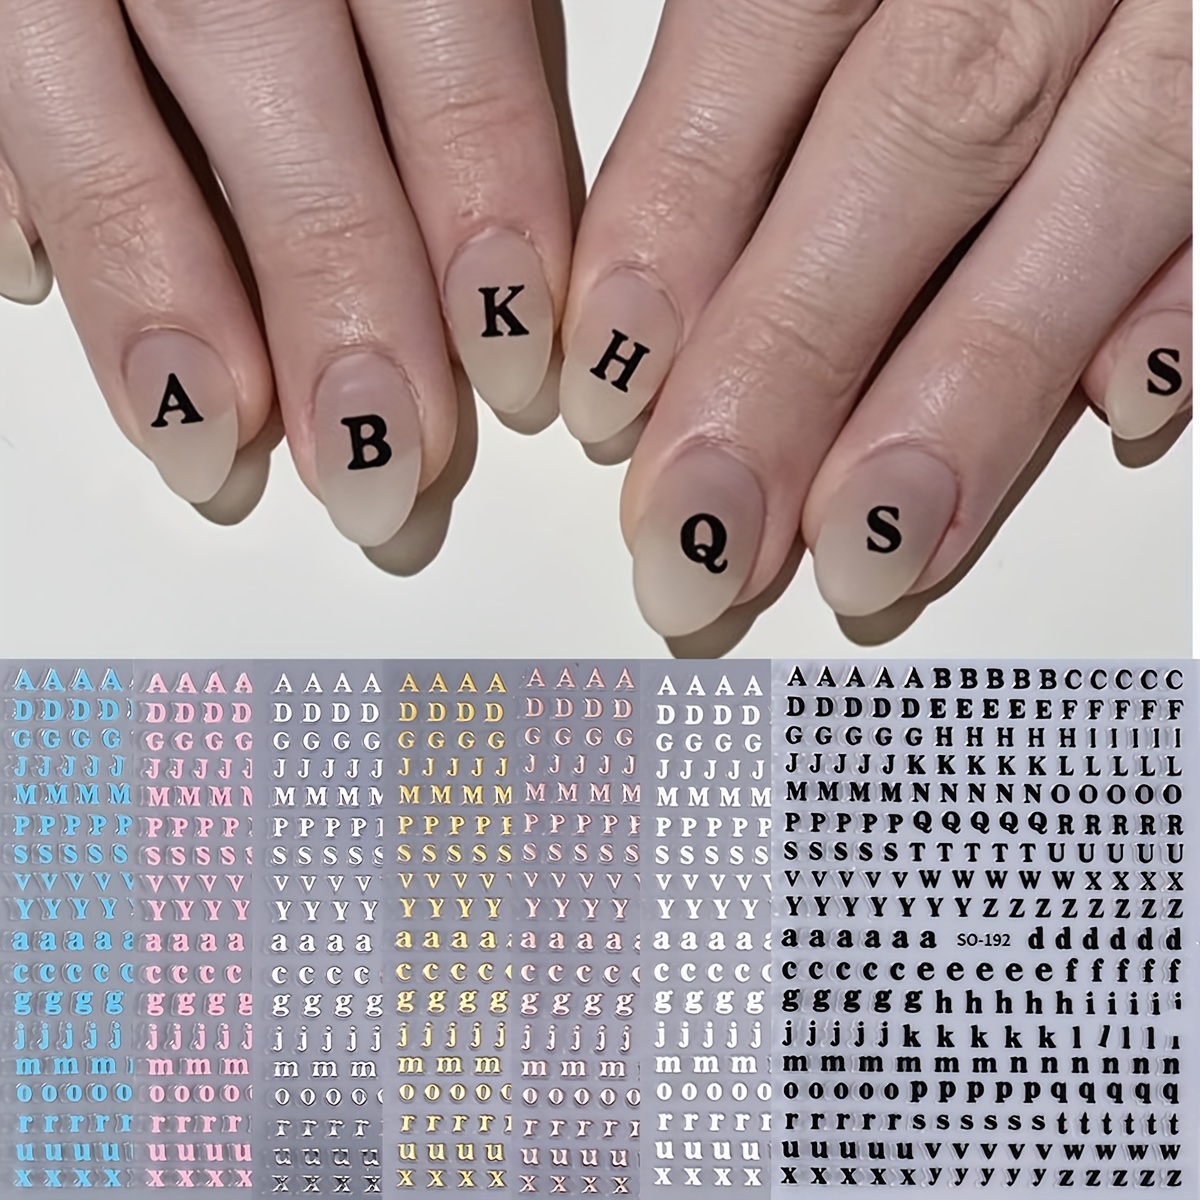 

7 Sheet 3d English Letter Design Nail Art Stickers Rose Golden Silvery Black White English Letters Nail Art Decals